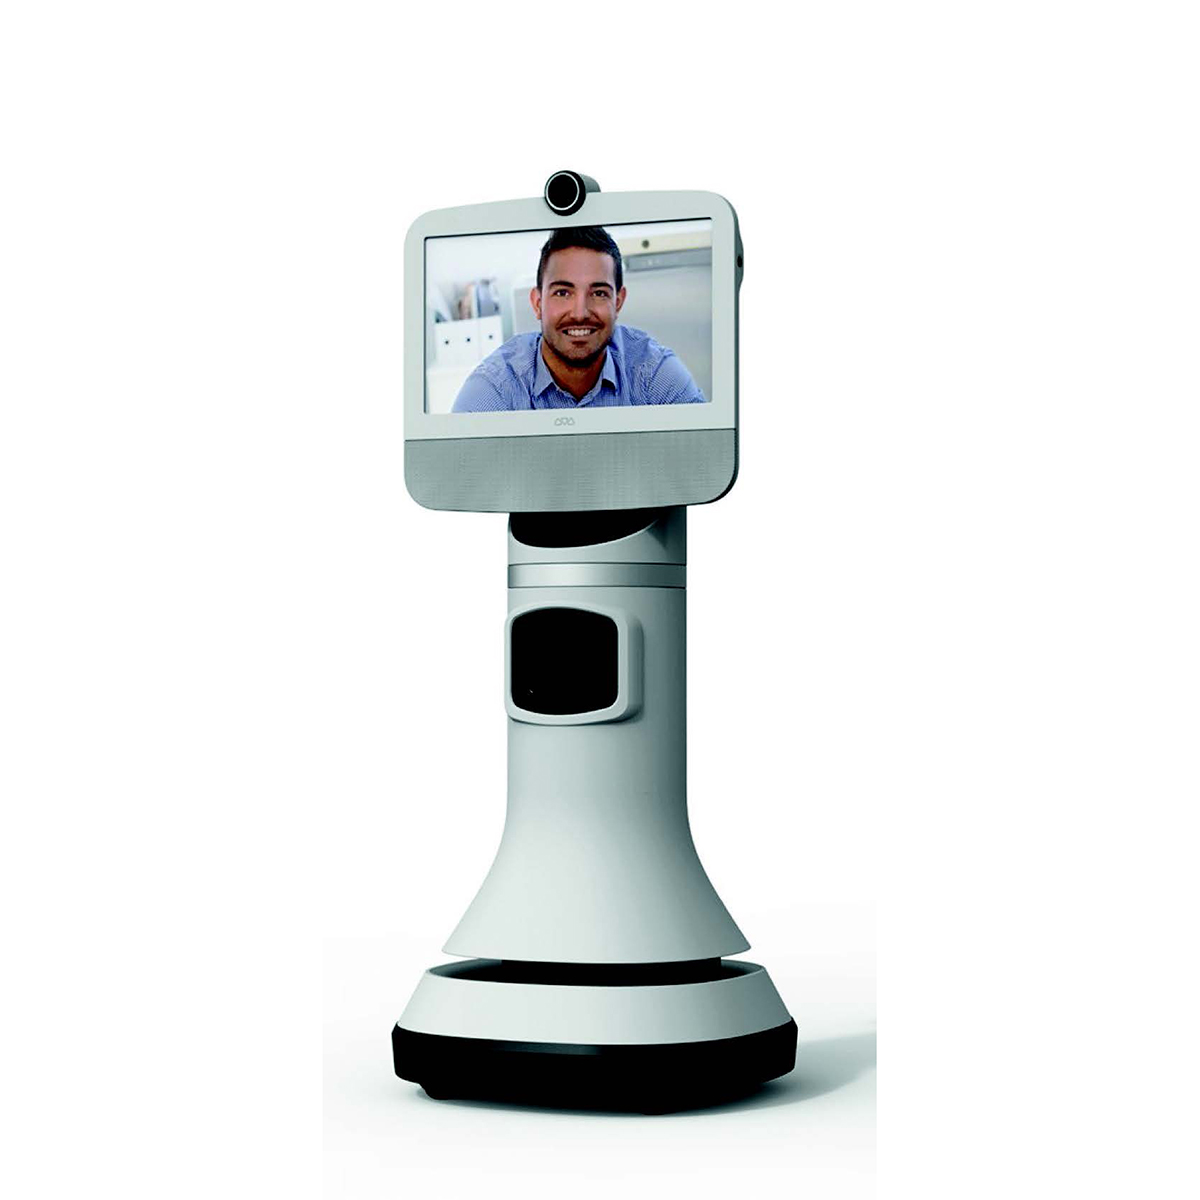 Hearing Loops in Telepresence systems